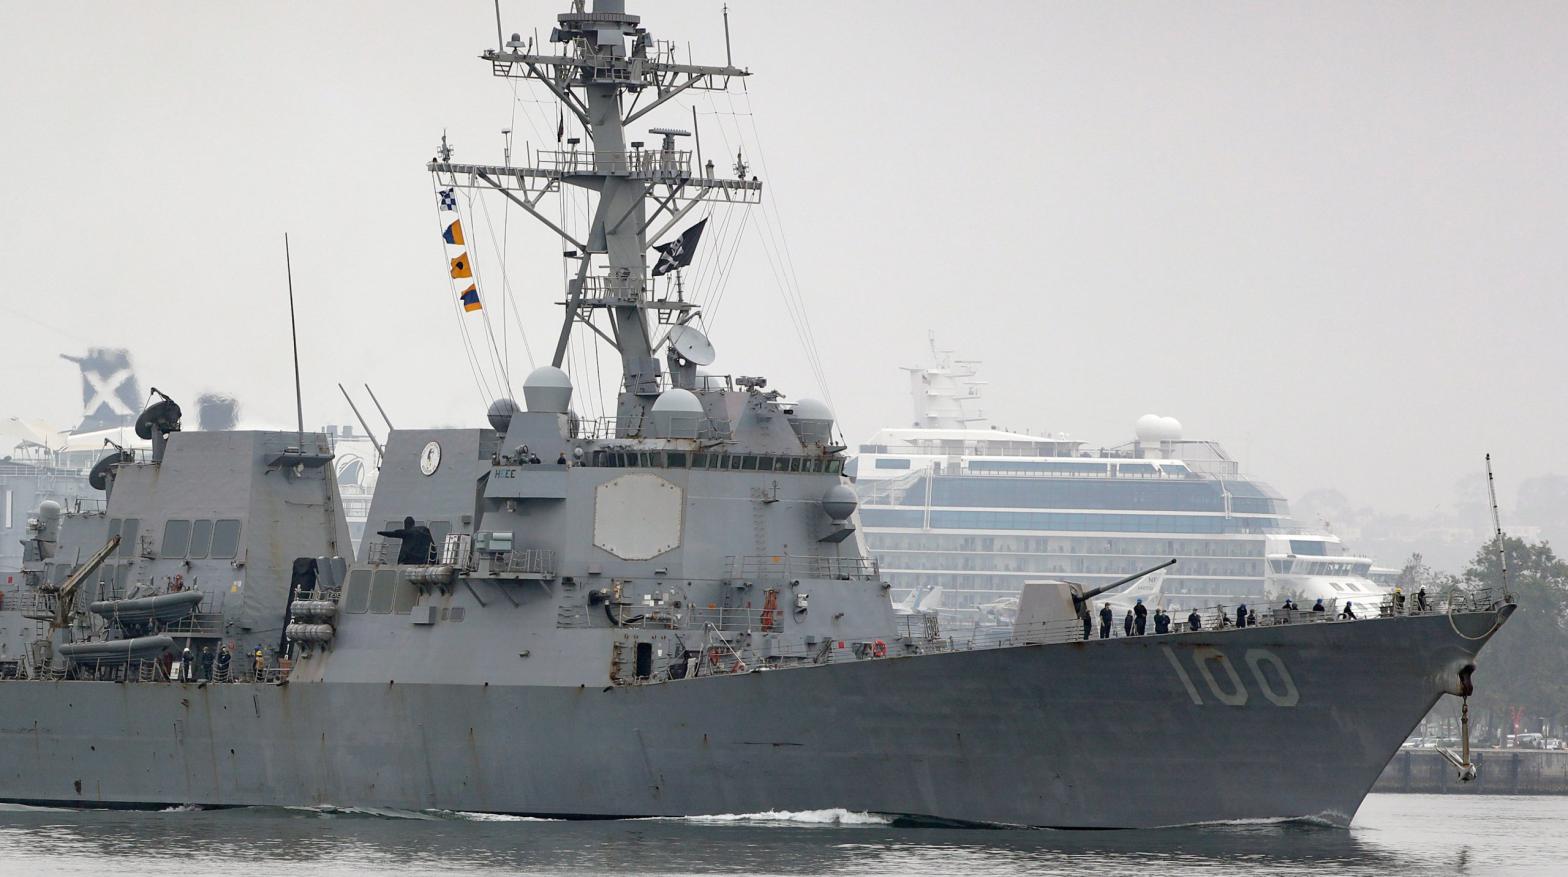 The USS Kidd, a Navy guided missile destroyer at the centre of the drone incident in July 2019. (Photo: Gregory Bull, Getty Images)